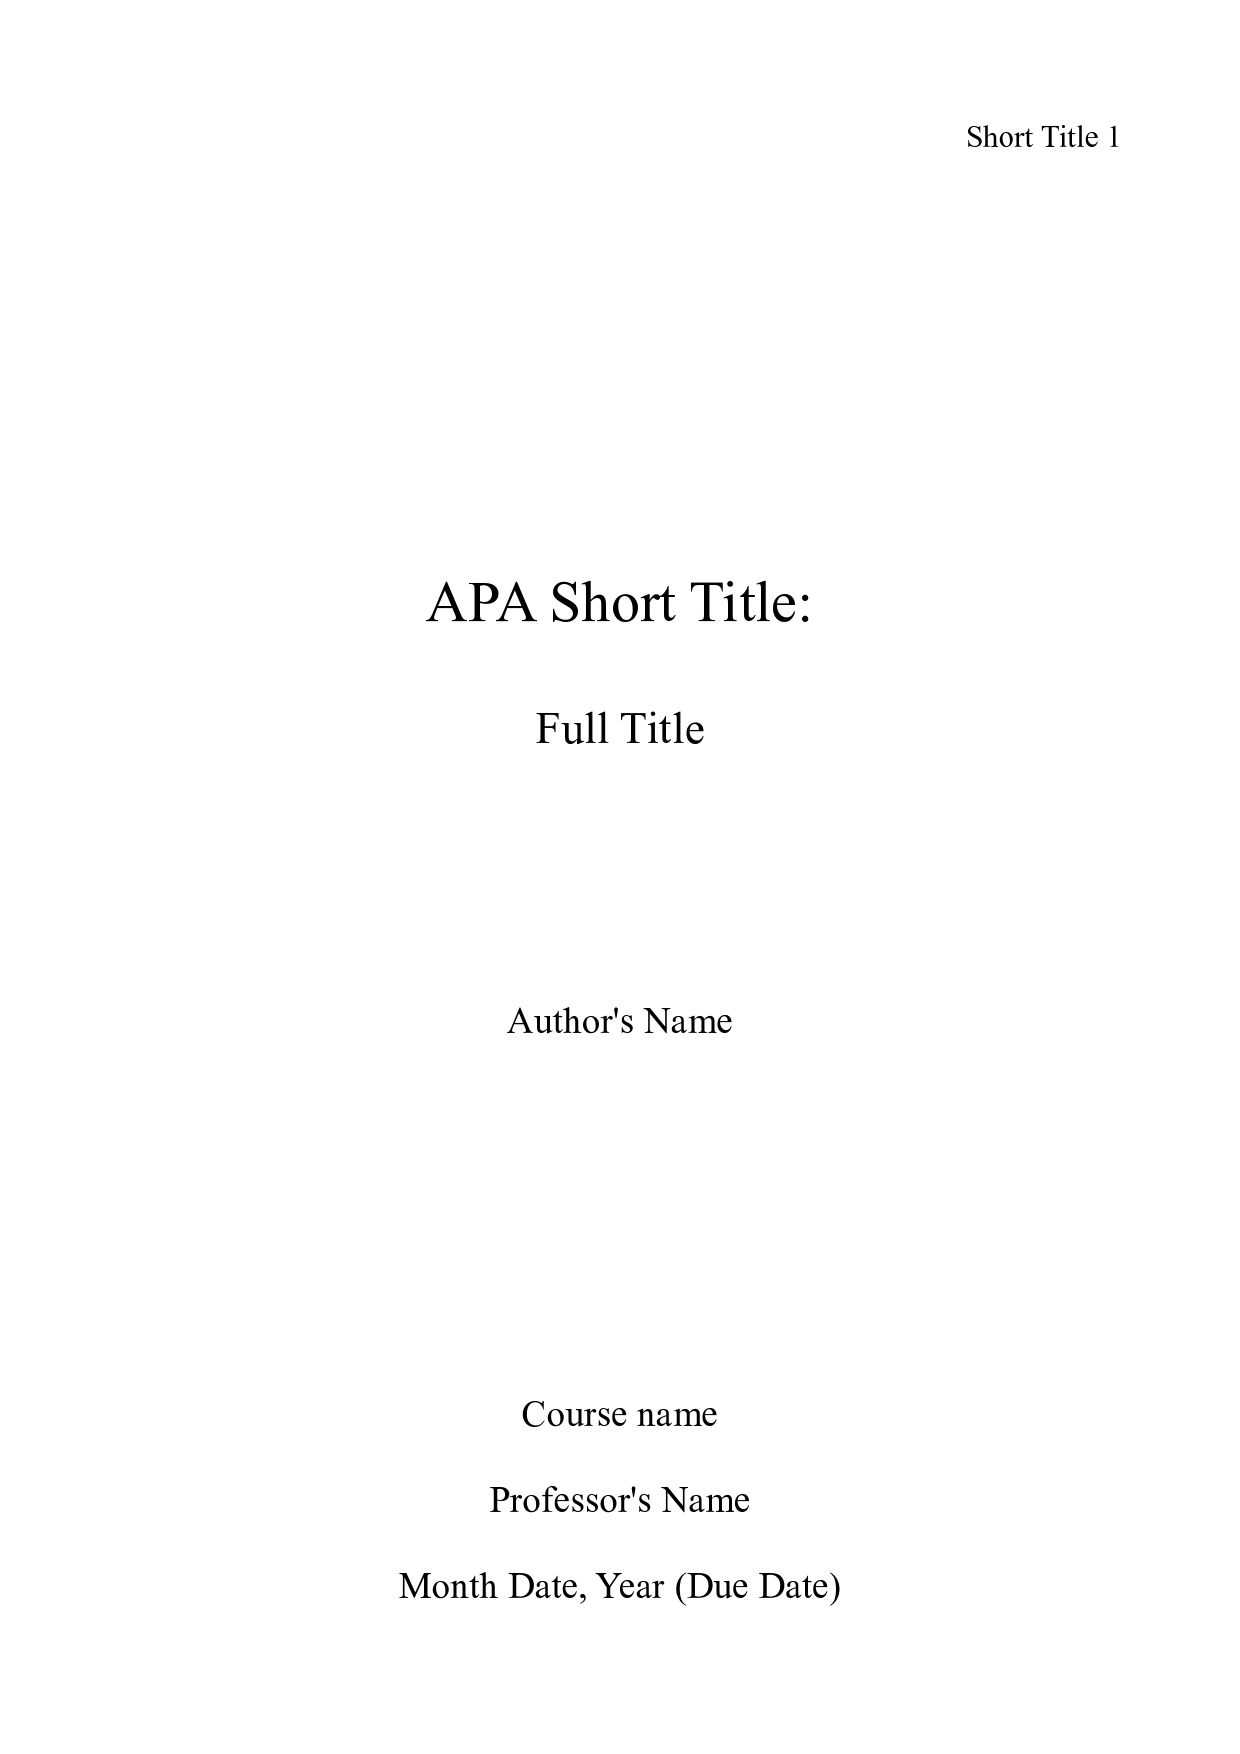 Picture Of Of An Apa Title Page | Apa Essay Help With Style Throughout Apa Format Template Word 2013